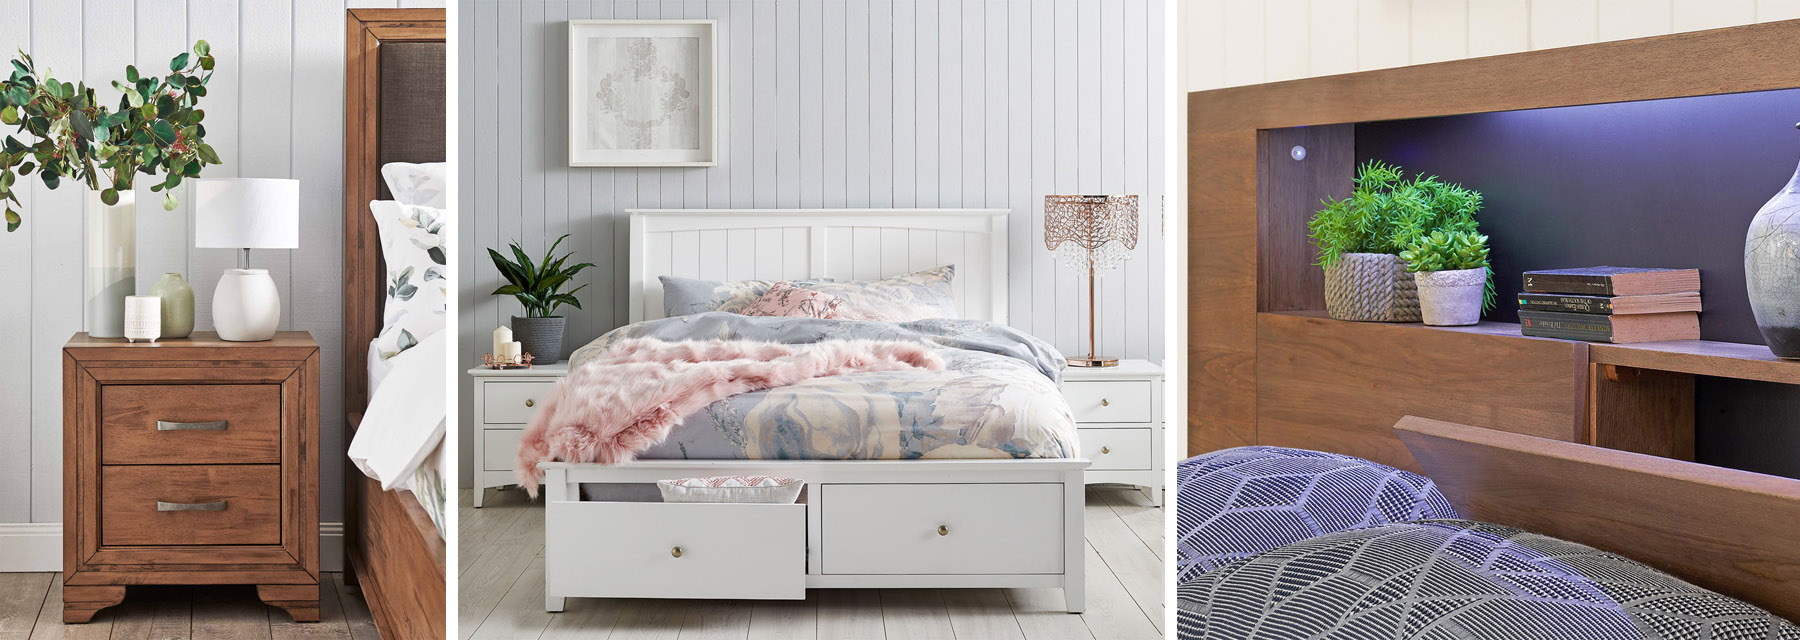 Bedroom Organisation Solutions for a stress-free bedroom